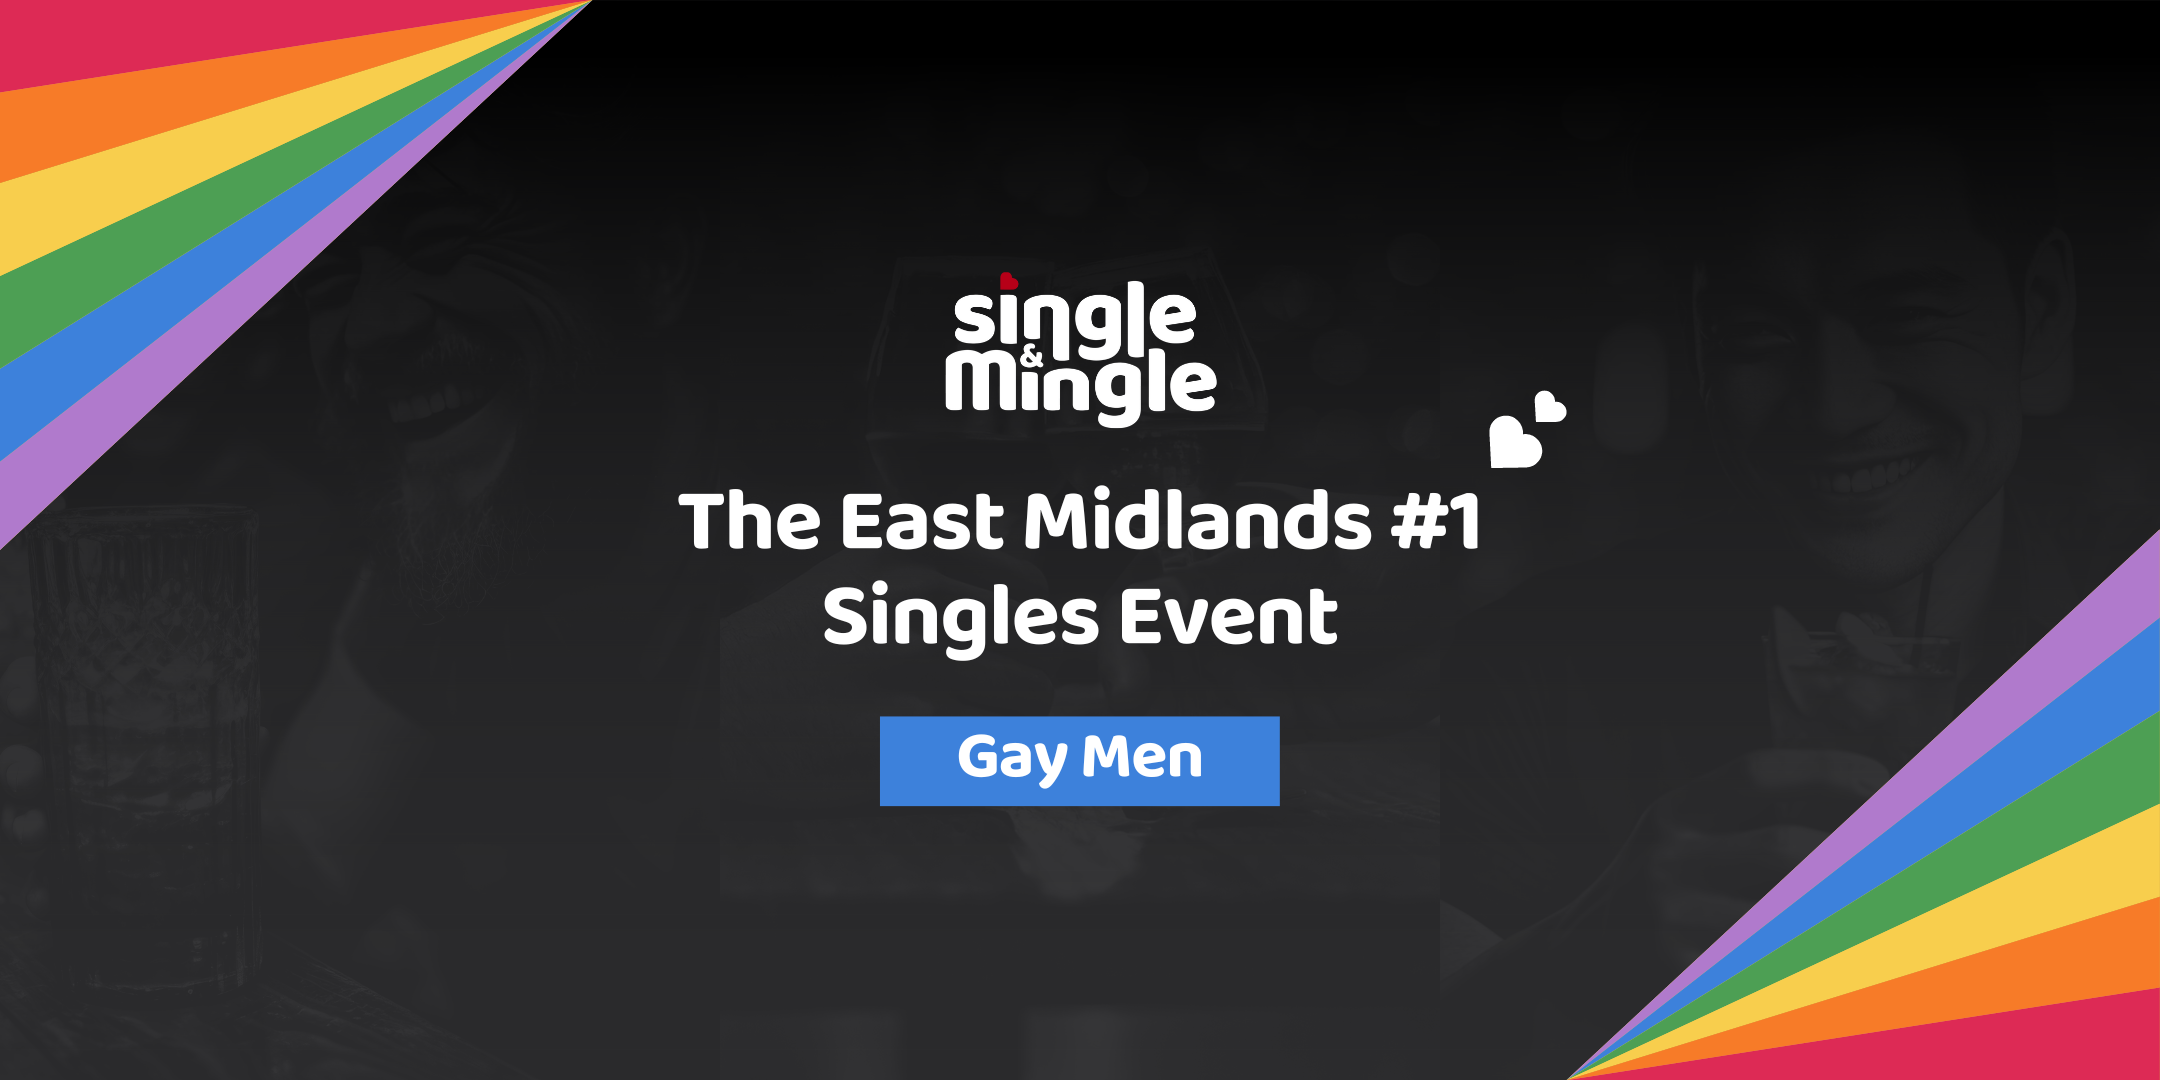 Single & Mingle's event for Gay Men